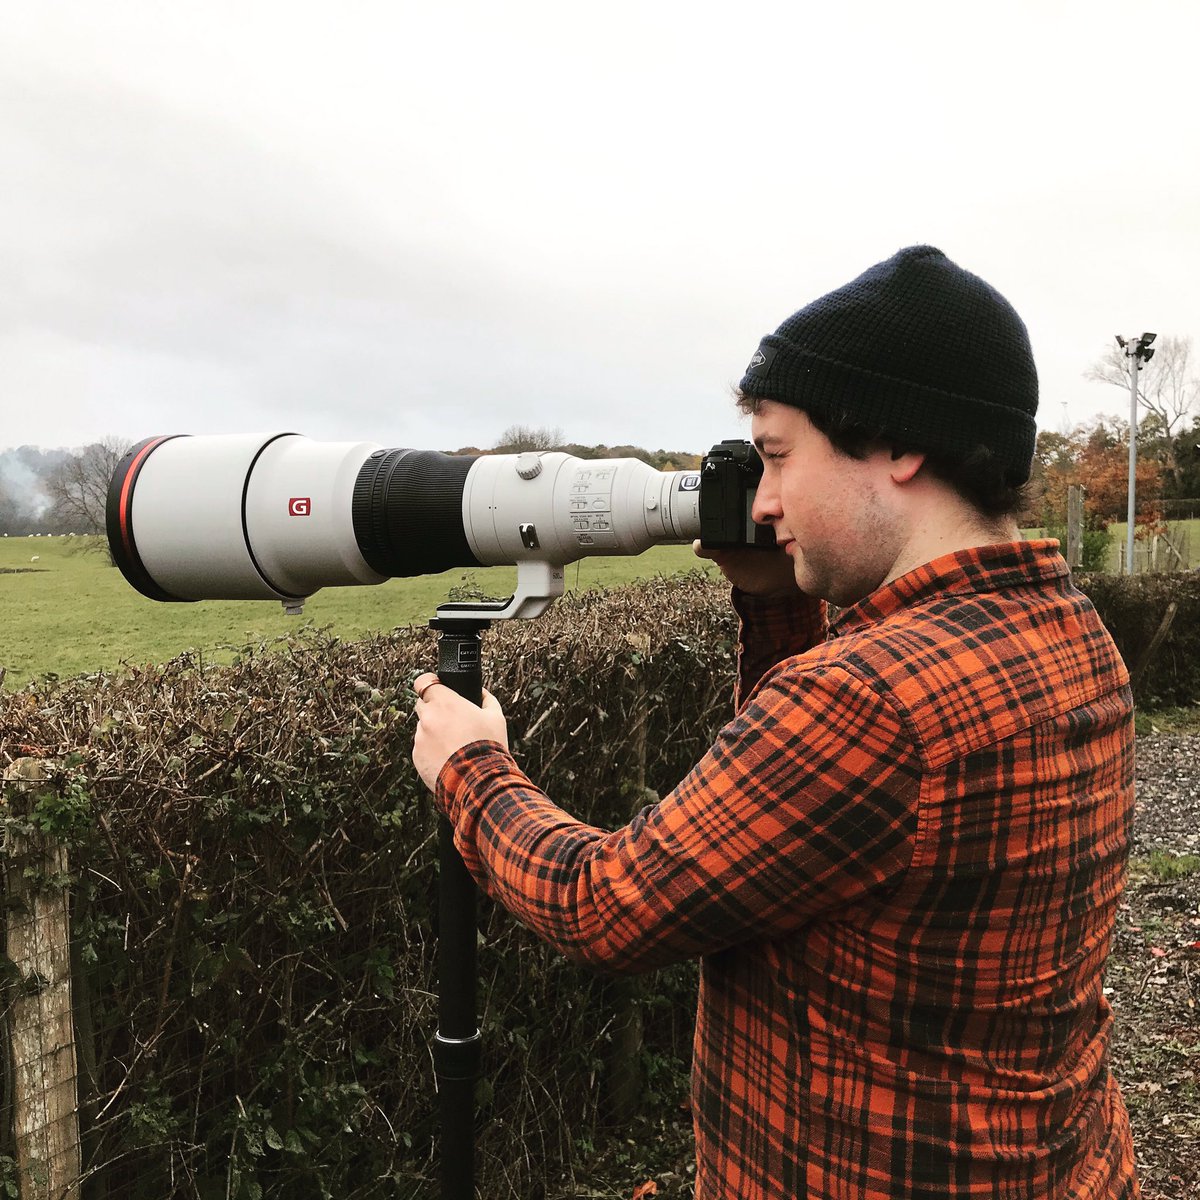 Here’s Fin testing the new @SonyAlpha a9 II with the superb Sony FE 600mm f/4 GM OSS. It’s a tough job, but somebody’s got to do it! 😝
.
#hireacamera #sonya9ii #sony600mm #sonycamerahire #lenshireuk #wildlifephotography #sportsphotography #incredibleautofocus